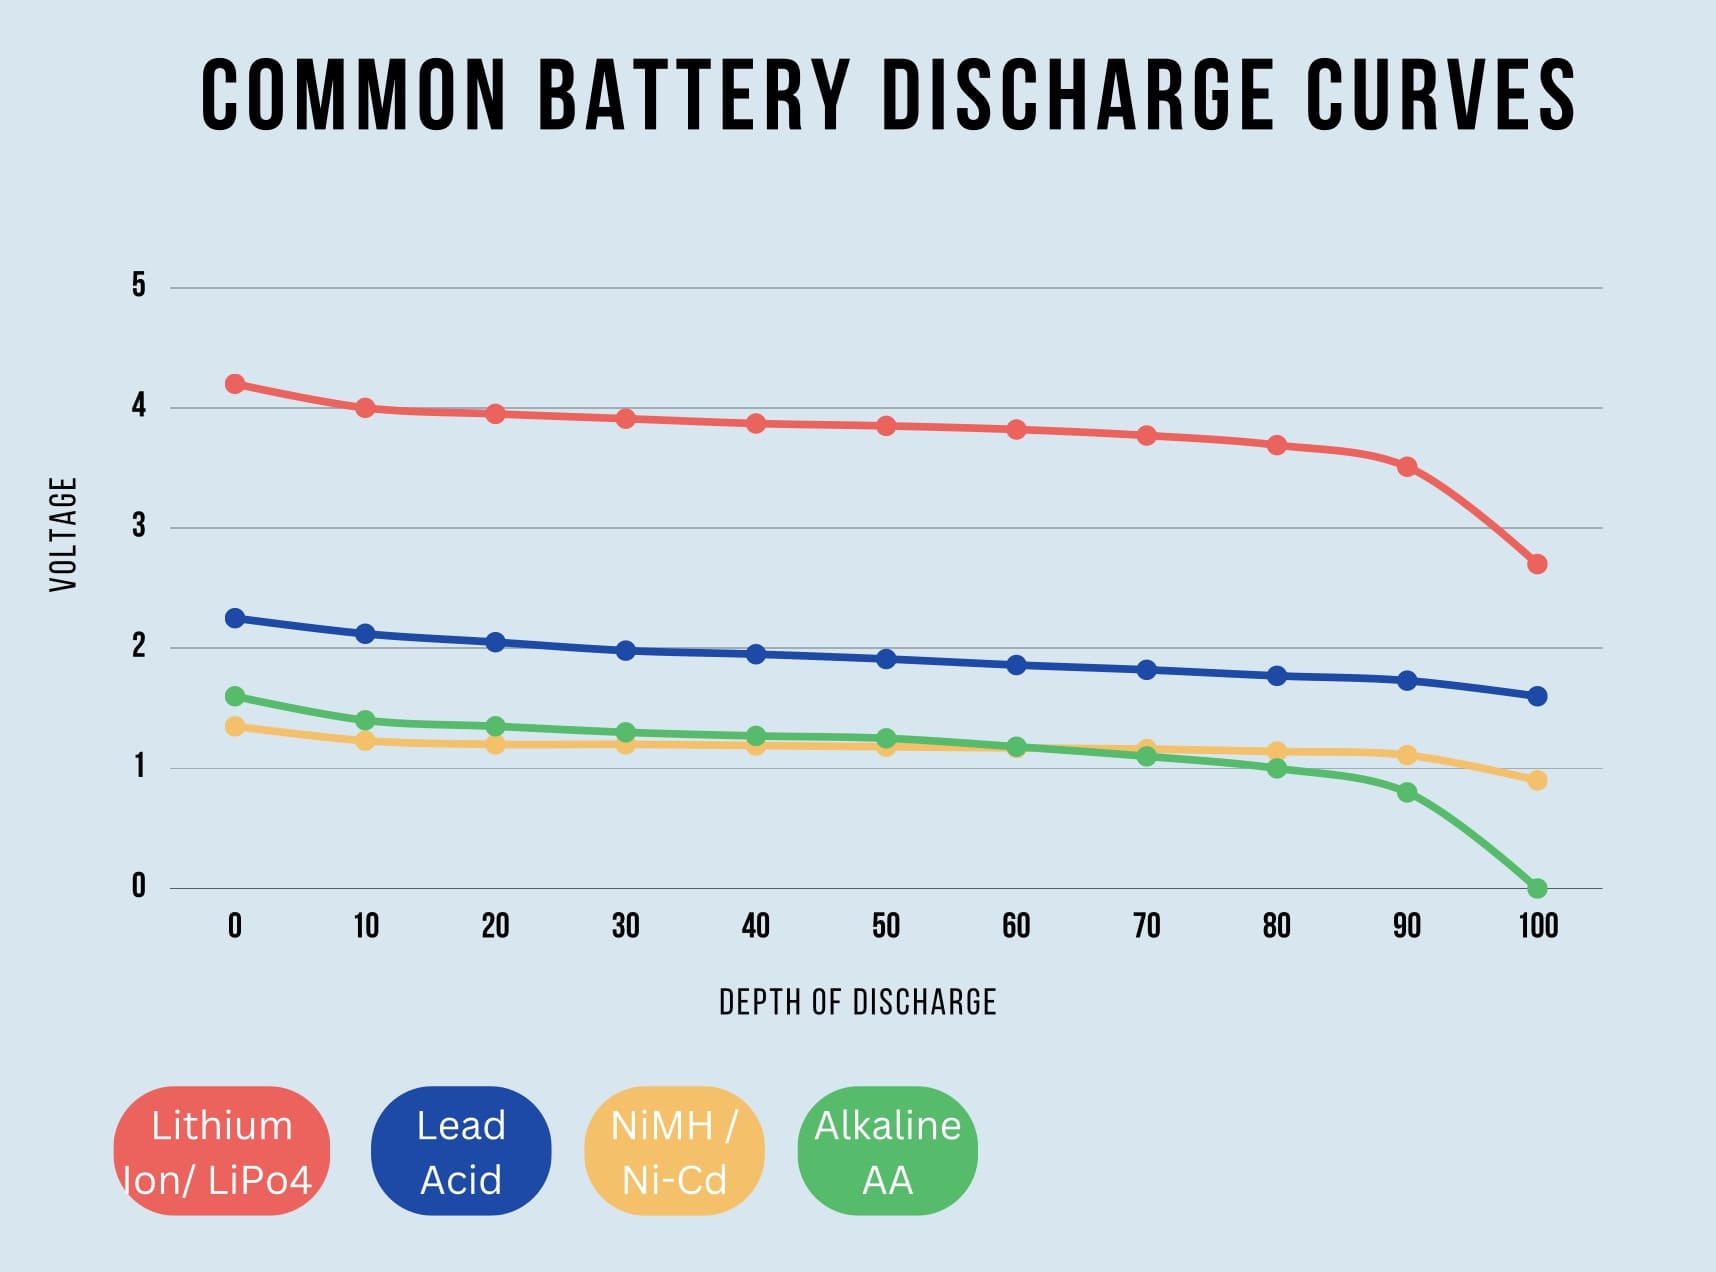 infographic showing the battery discharge curves for Lithium Ion, Lead Acid, Nickel Metal Hydride and Alkaline batteries. Shows depth of discharge on the x axis and voltage on the y axis.